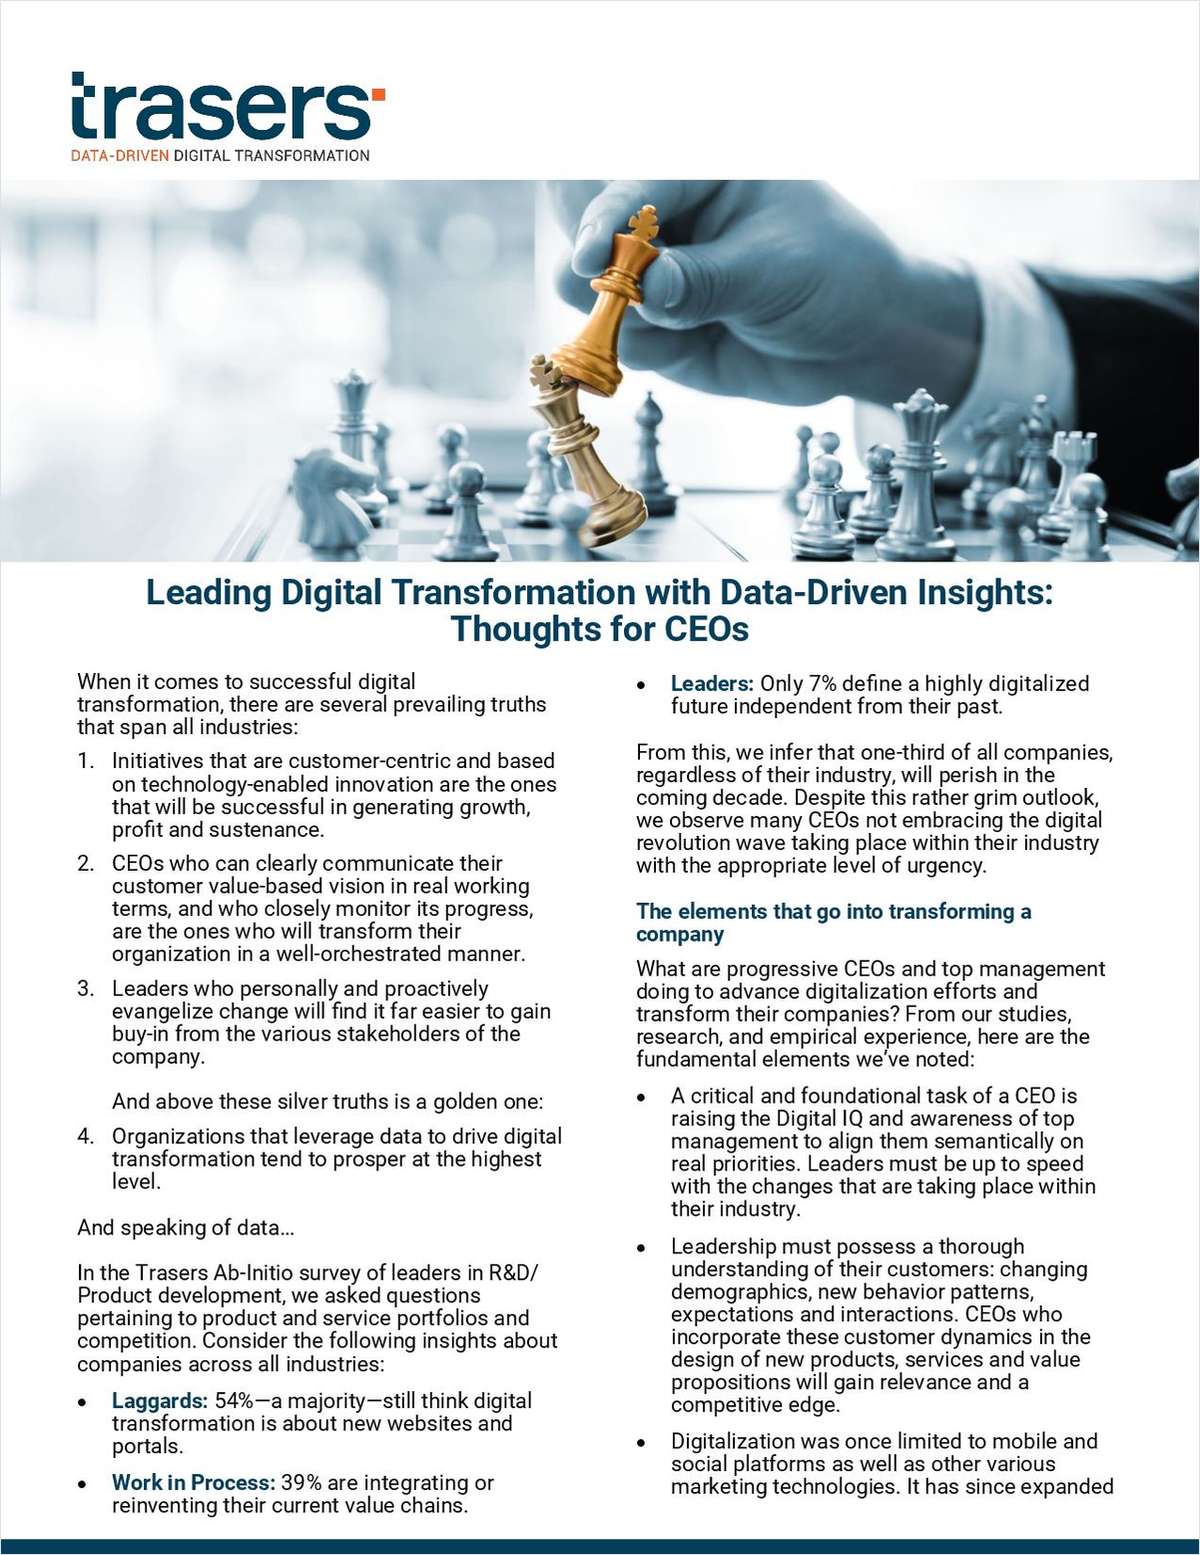 Leading Digital Transformations with Data-Driven Insights: Thoughts for CEOs